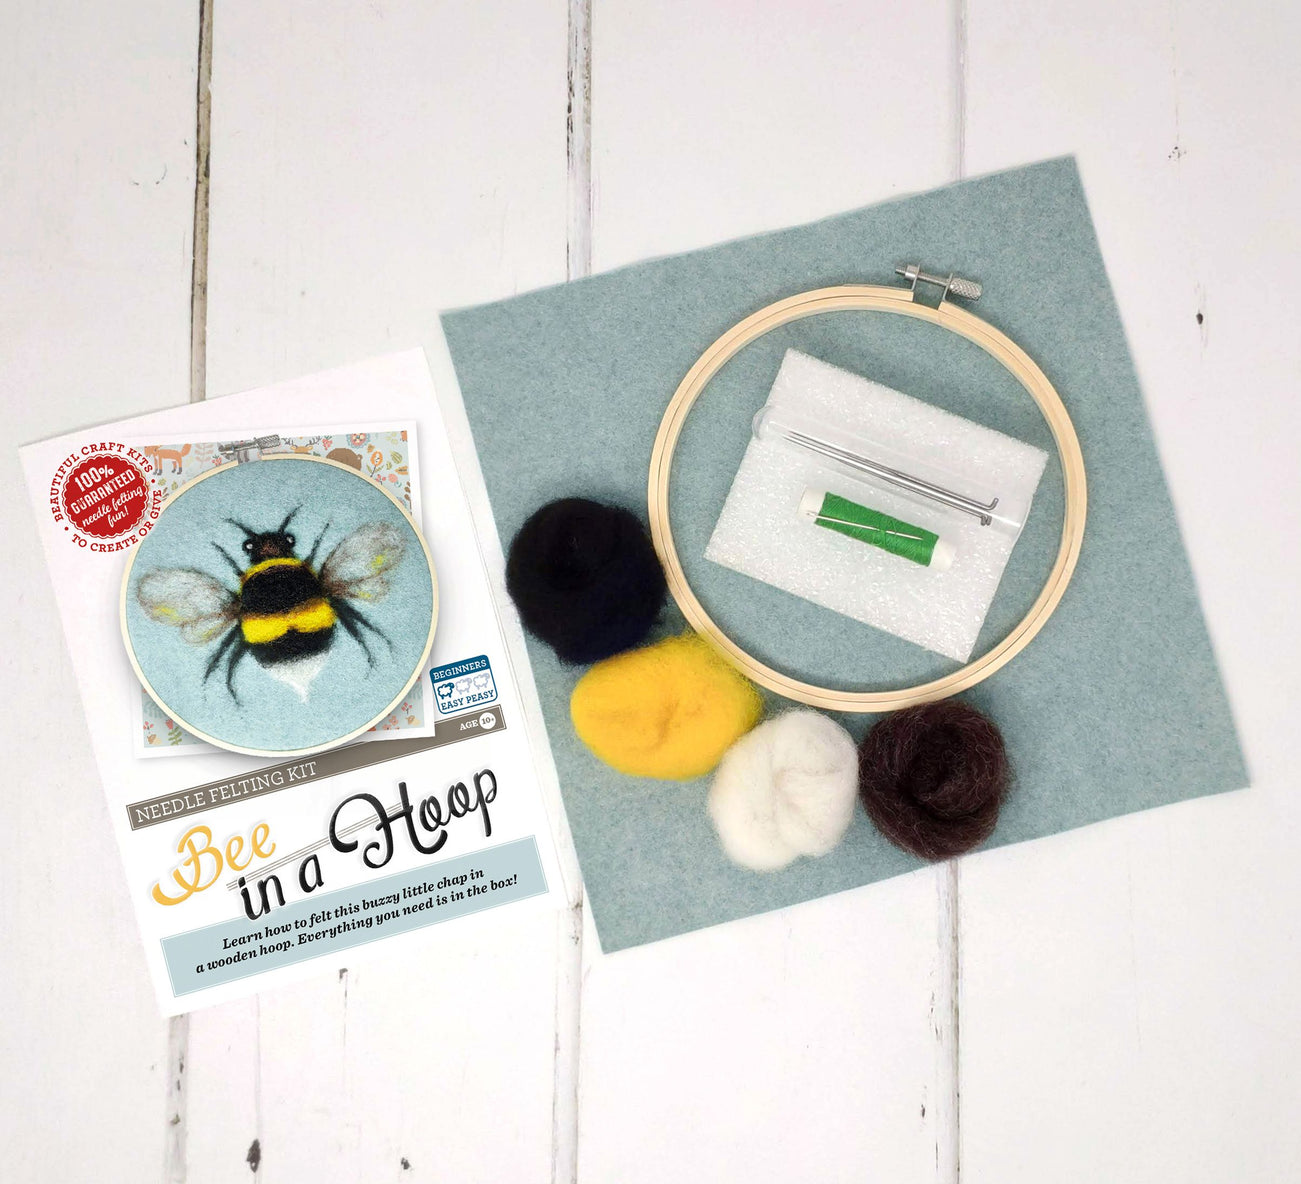 The Crafty Kit Company - Bee in a Hoop Needle Felting Craft Kit